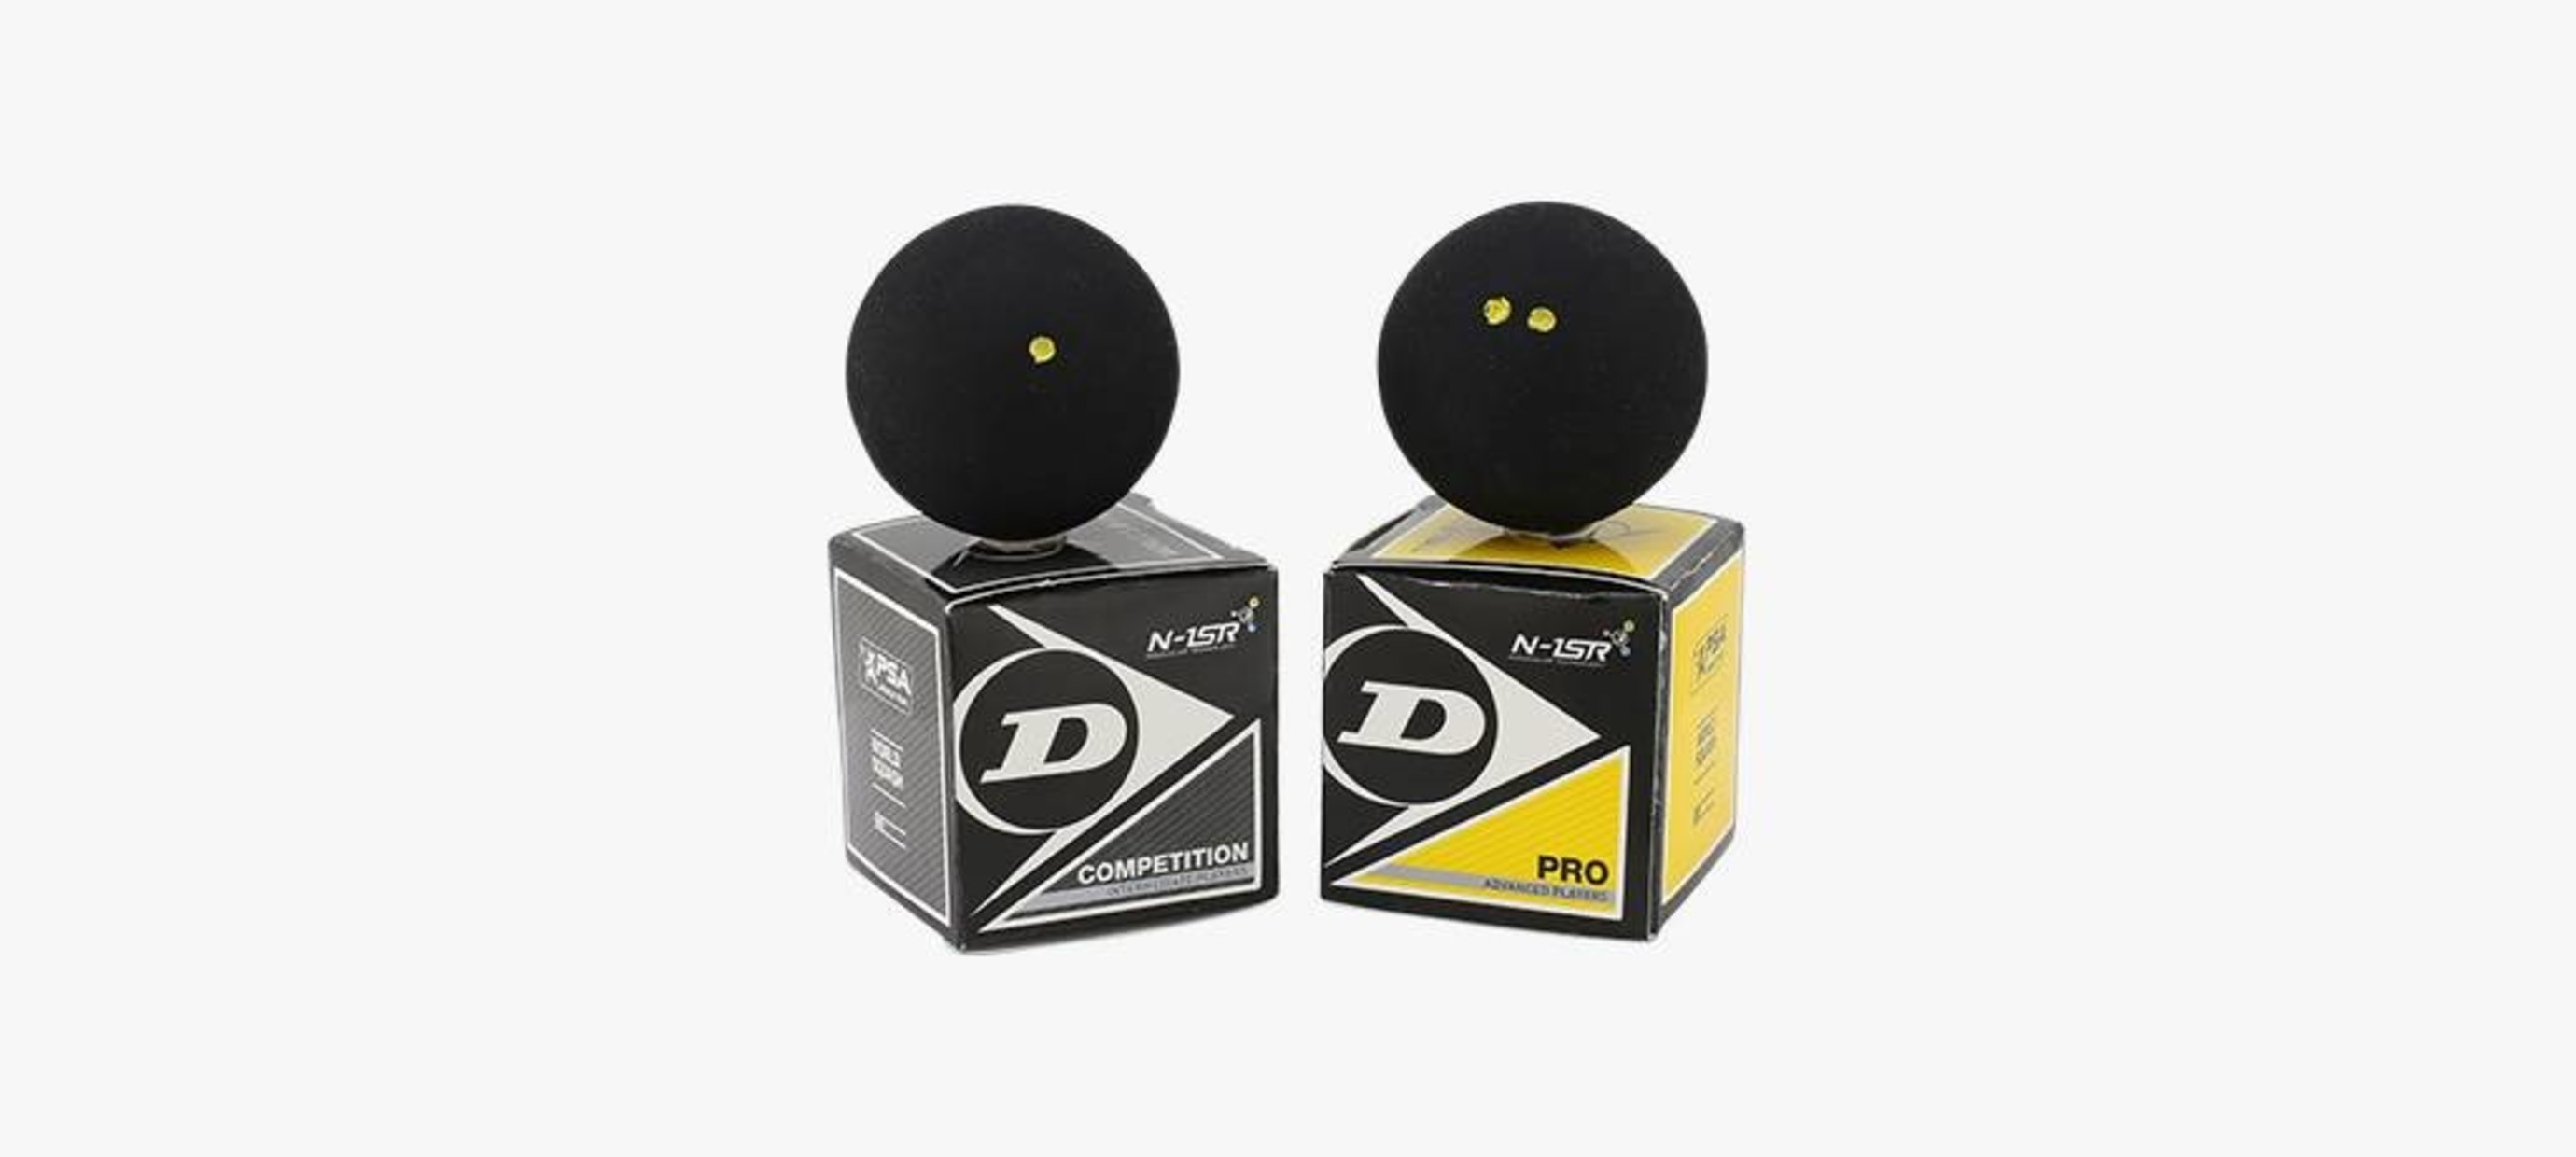 3x Dunlop Pro Squash Balls Double Yellow Dot Intro Blue Red Progress Competition 